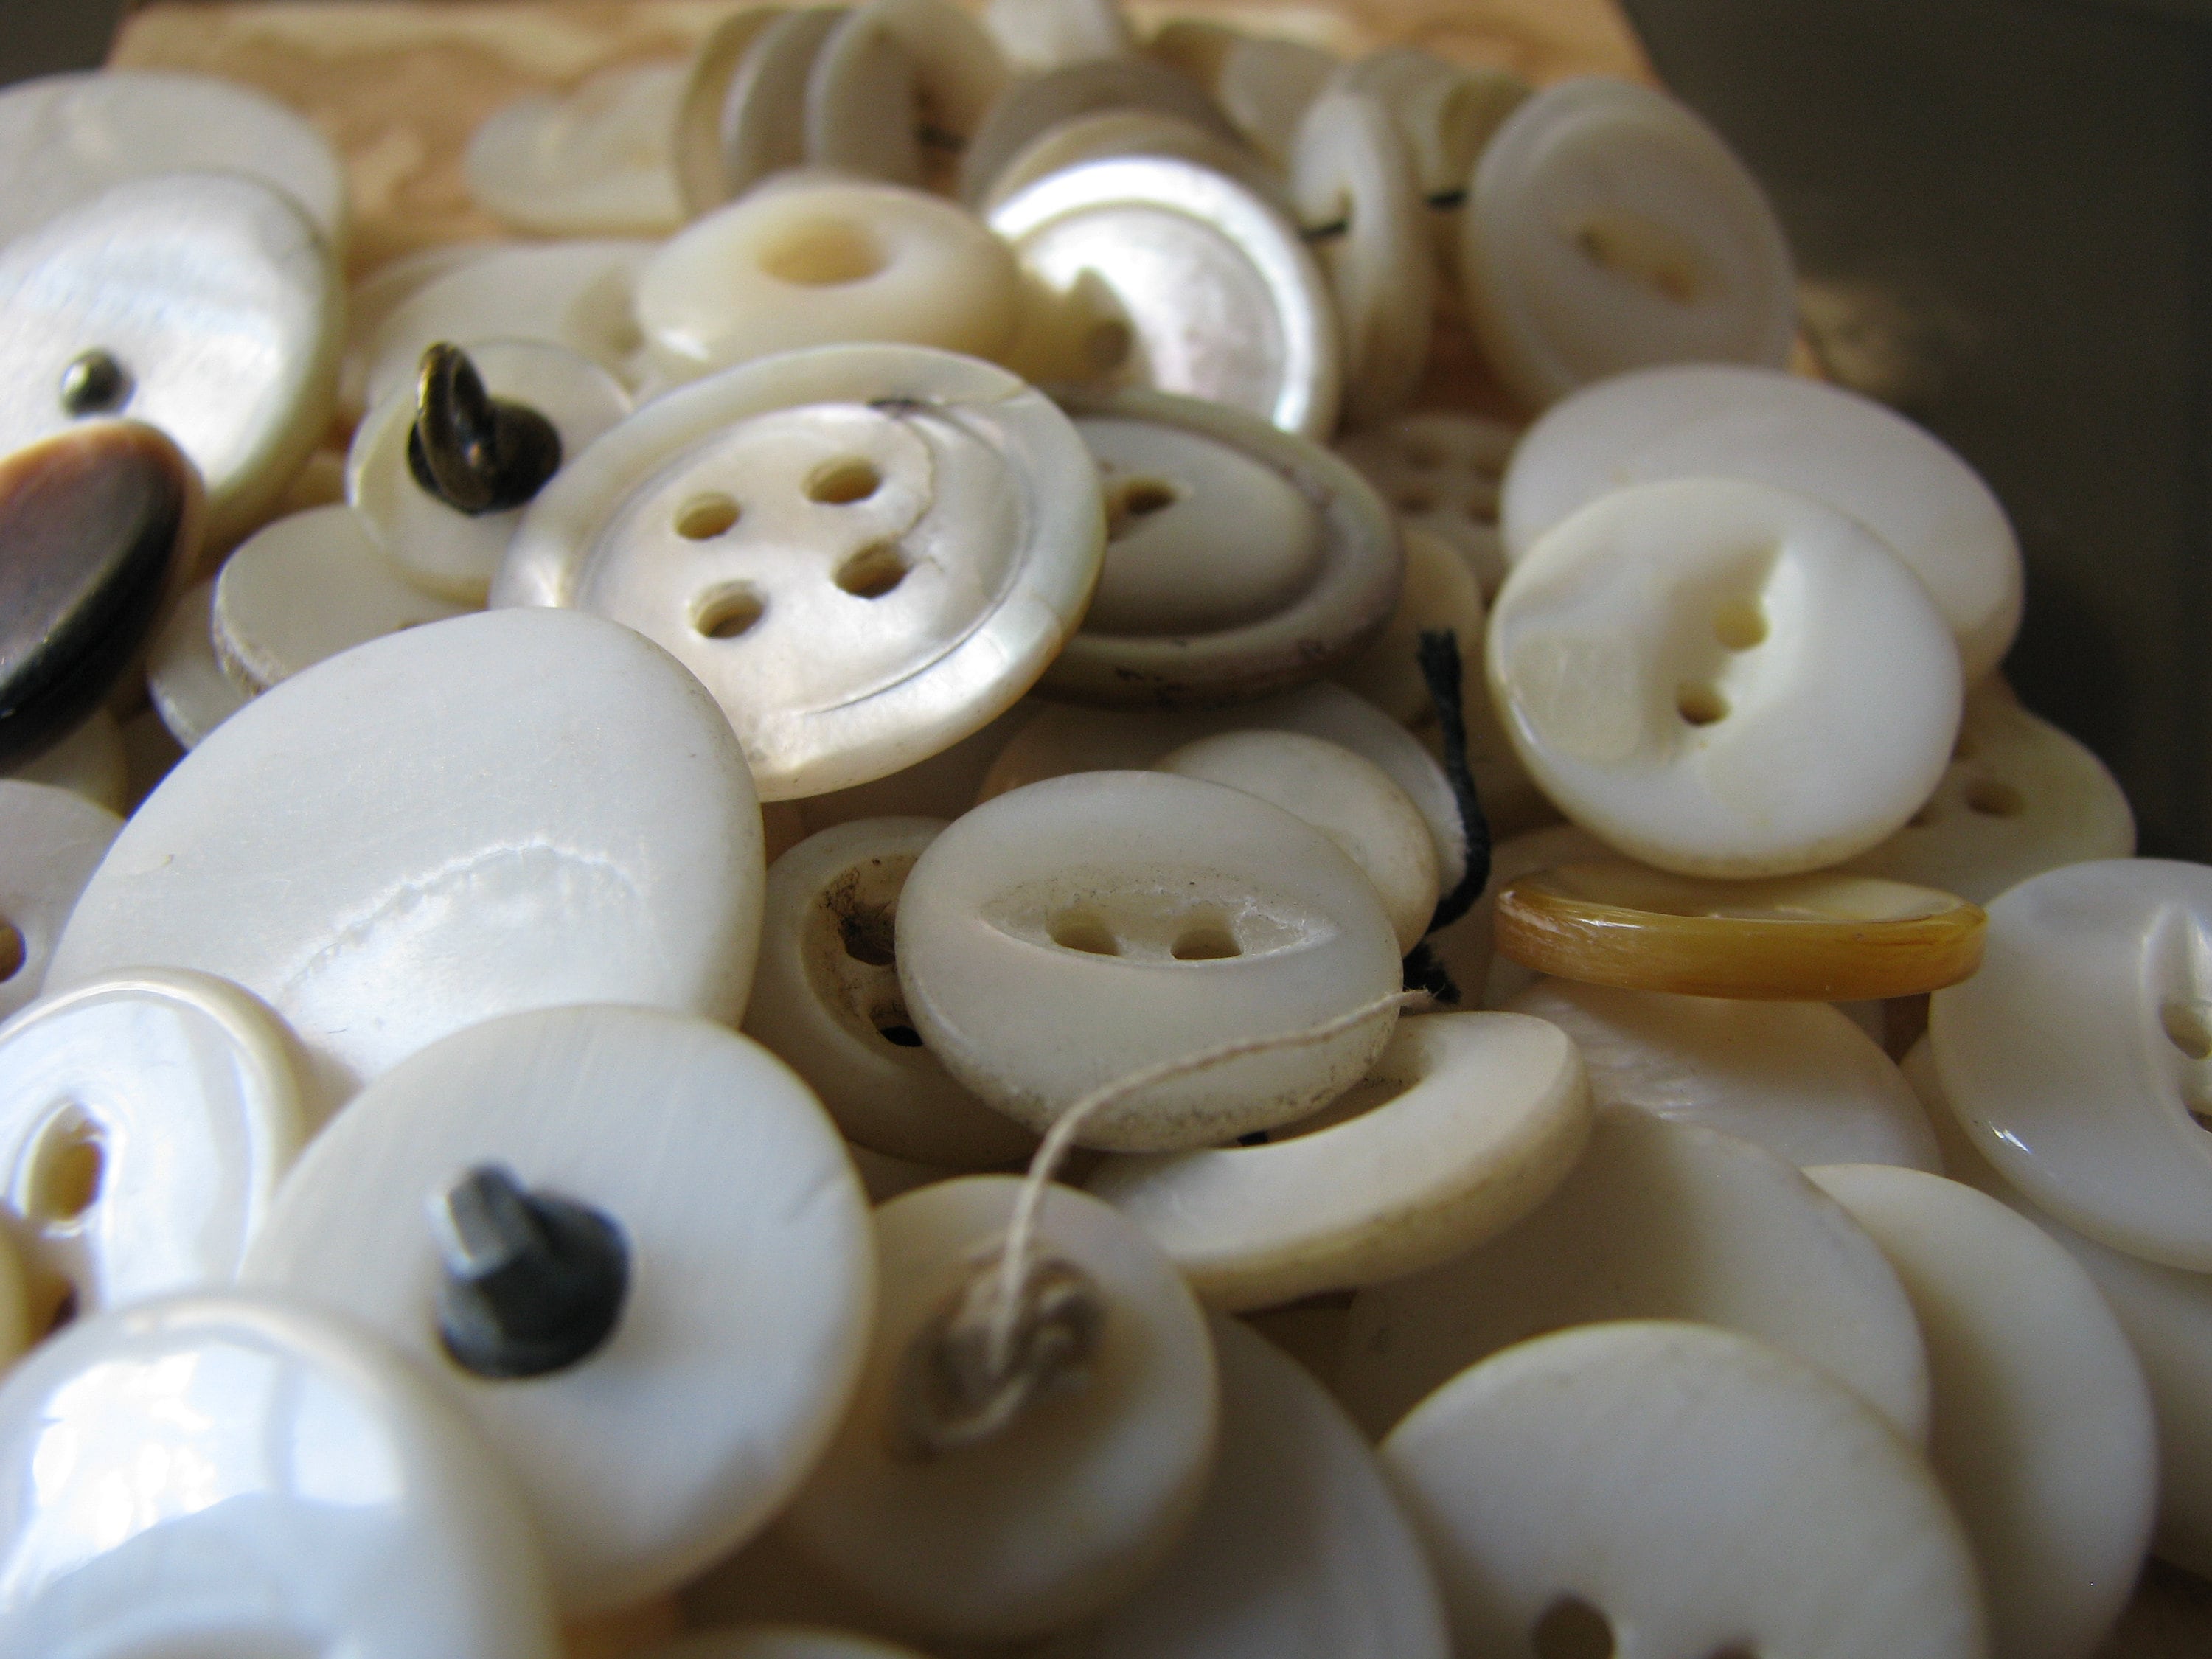 100 Antique Mother of Pearl Buttons Antique Sewing Buttons Antique Pearl Buttons 100 Antique Shell Buttons